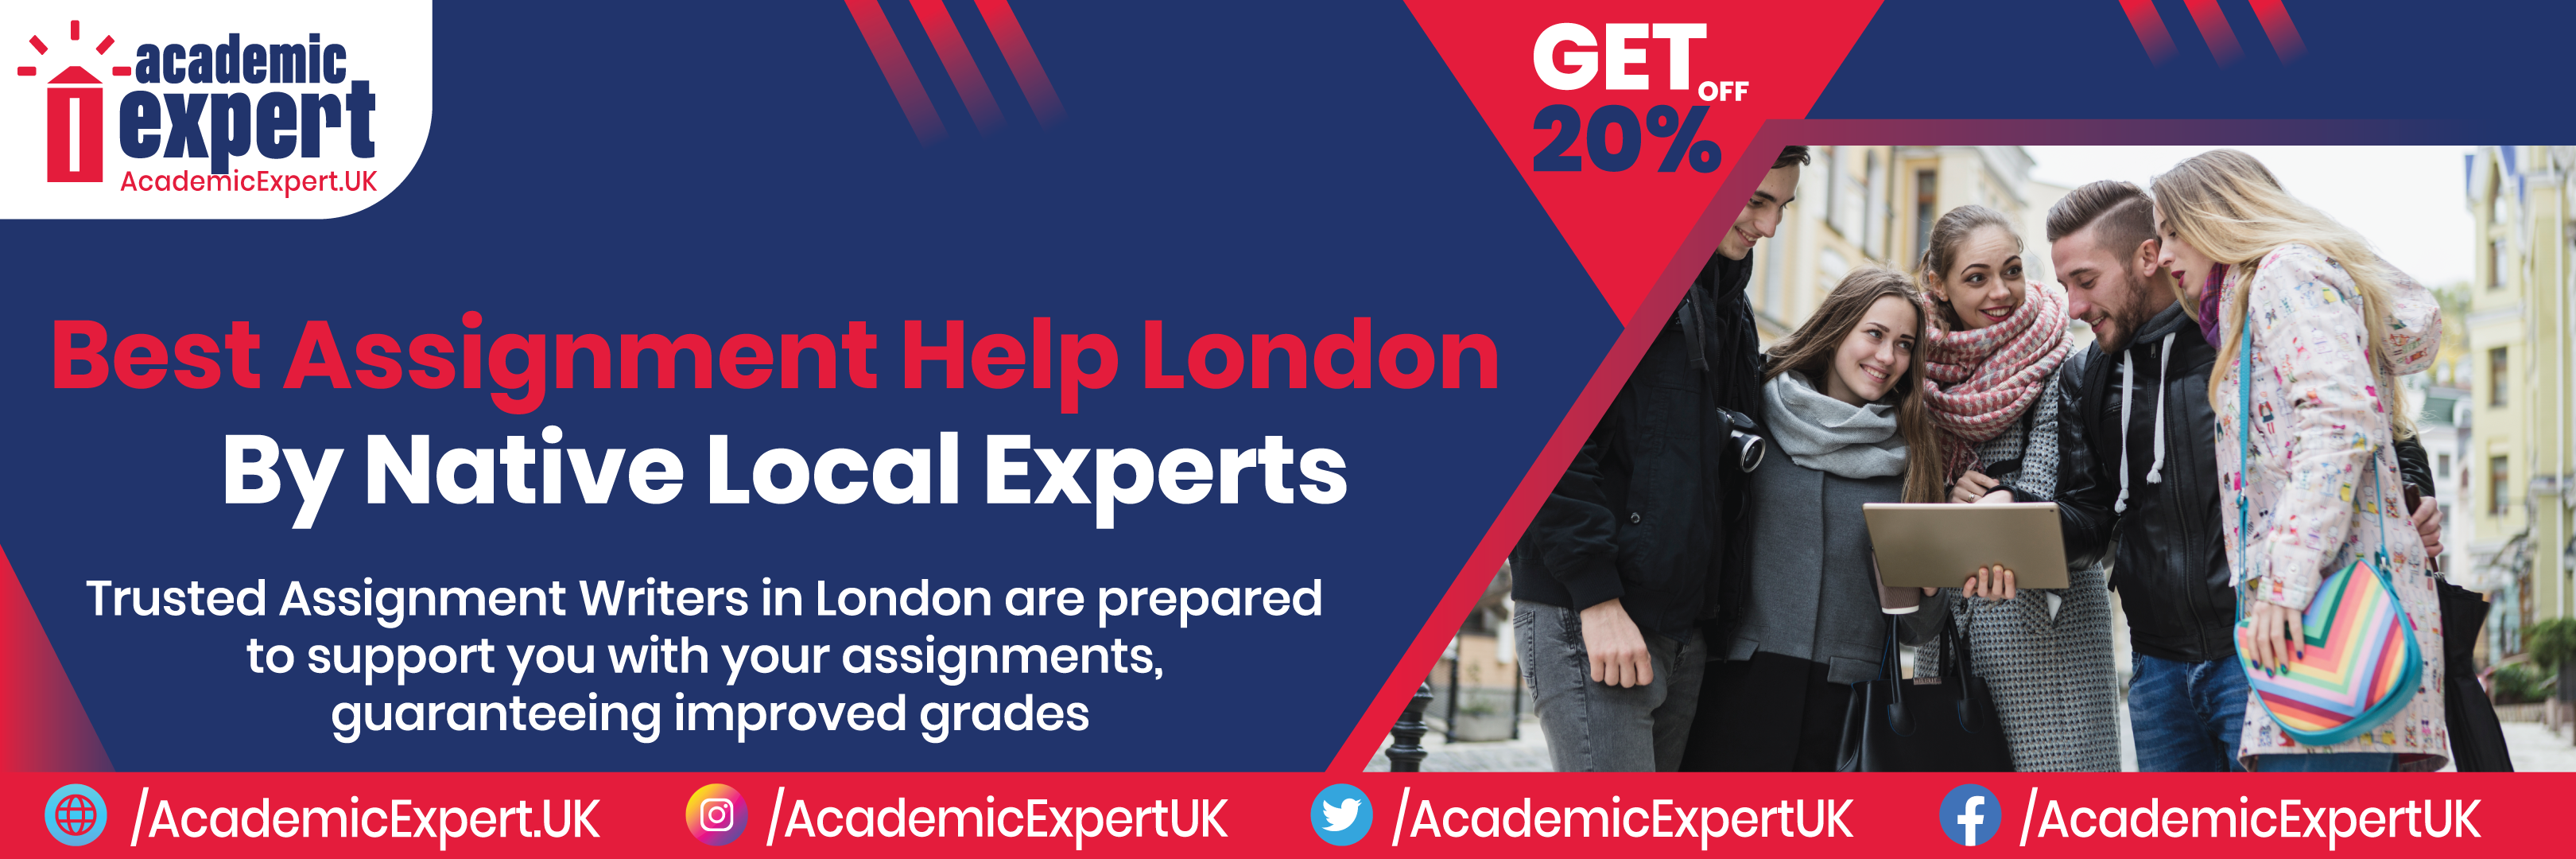 Best Assignment Help London By Native Local Experts